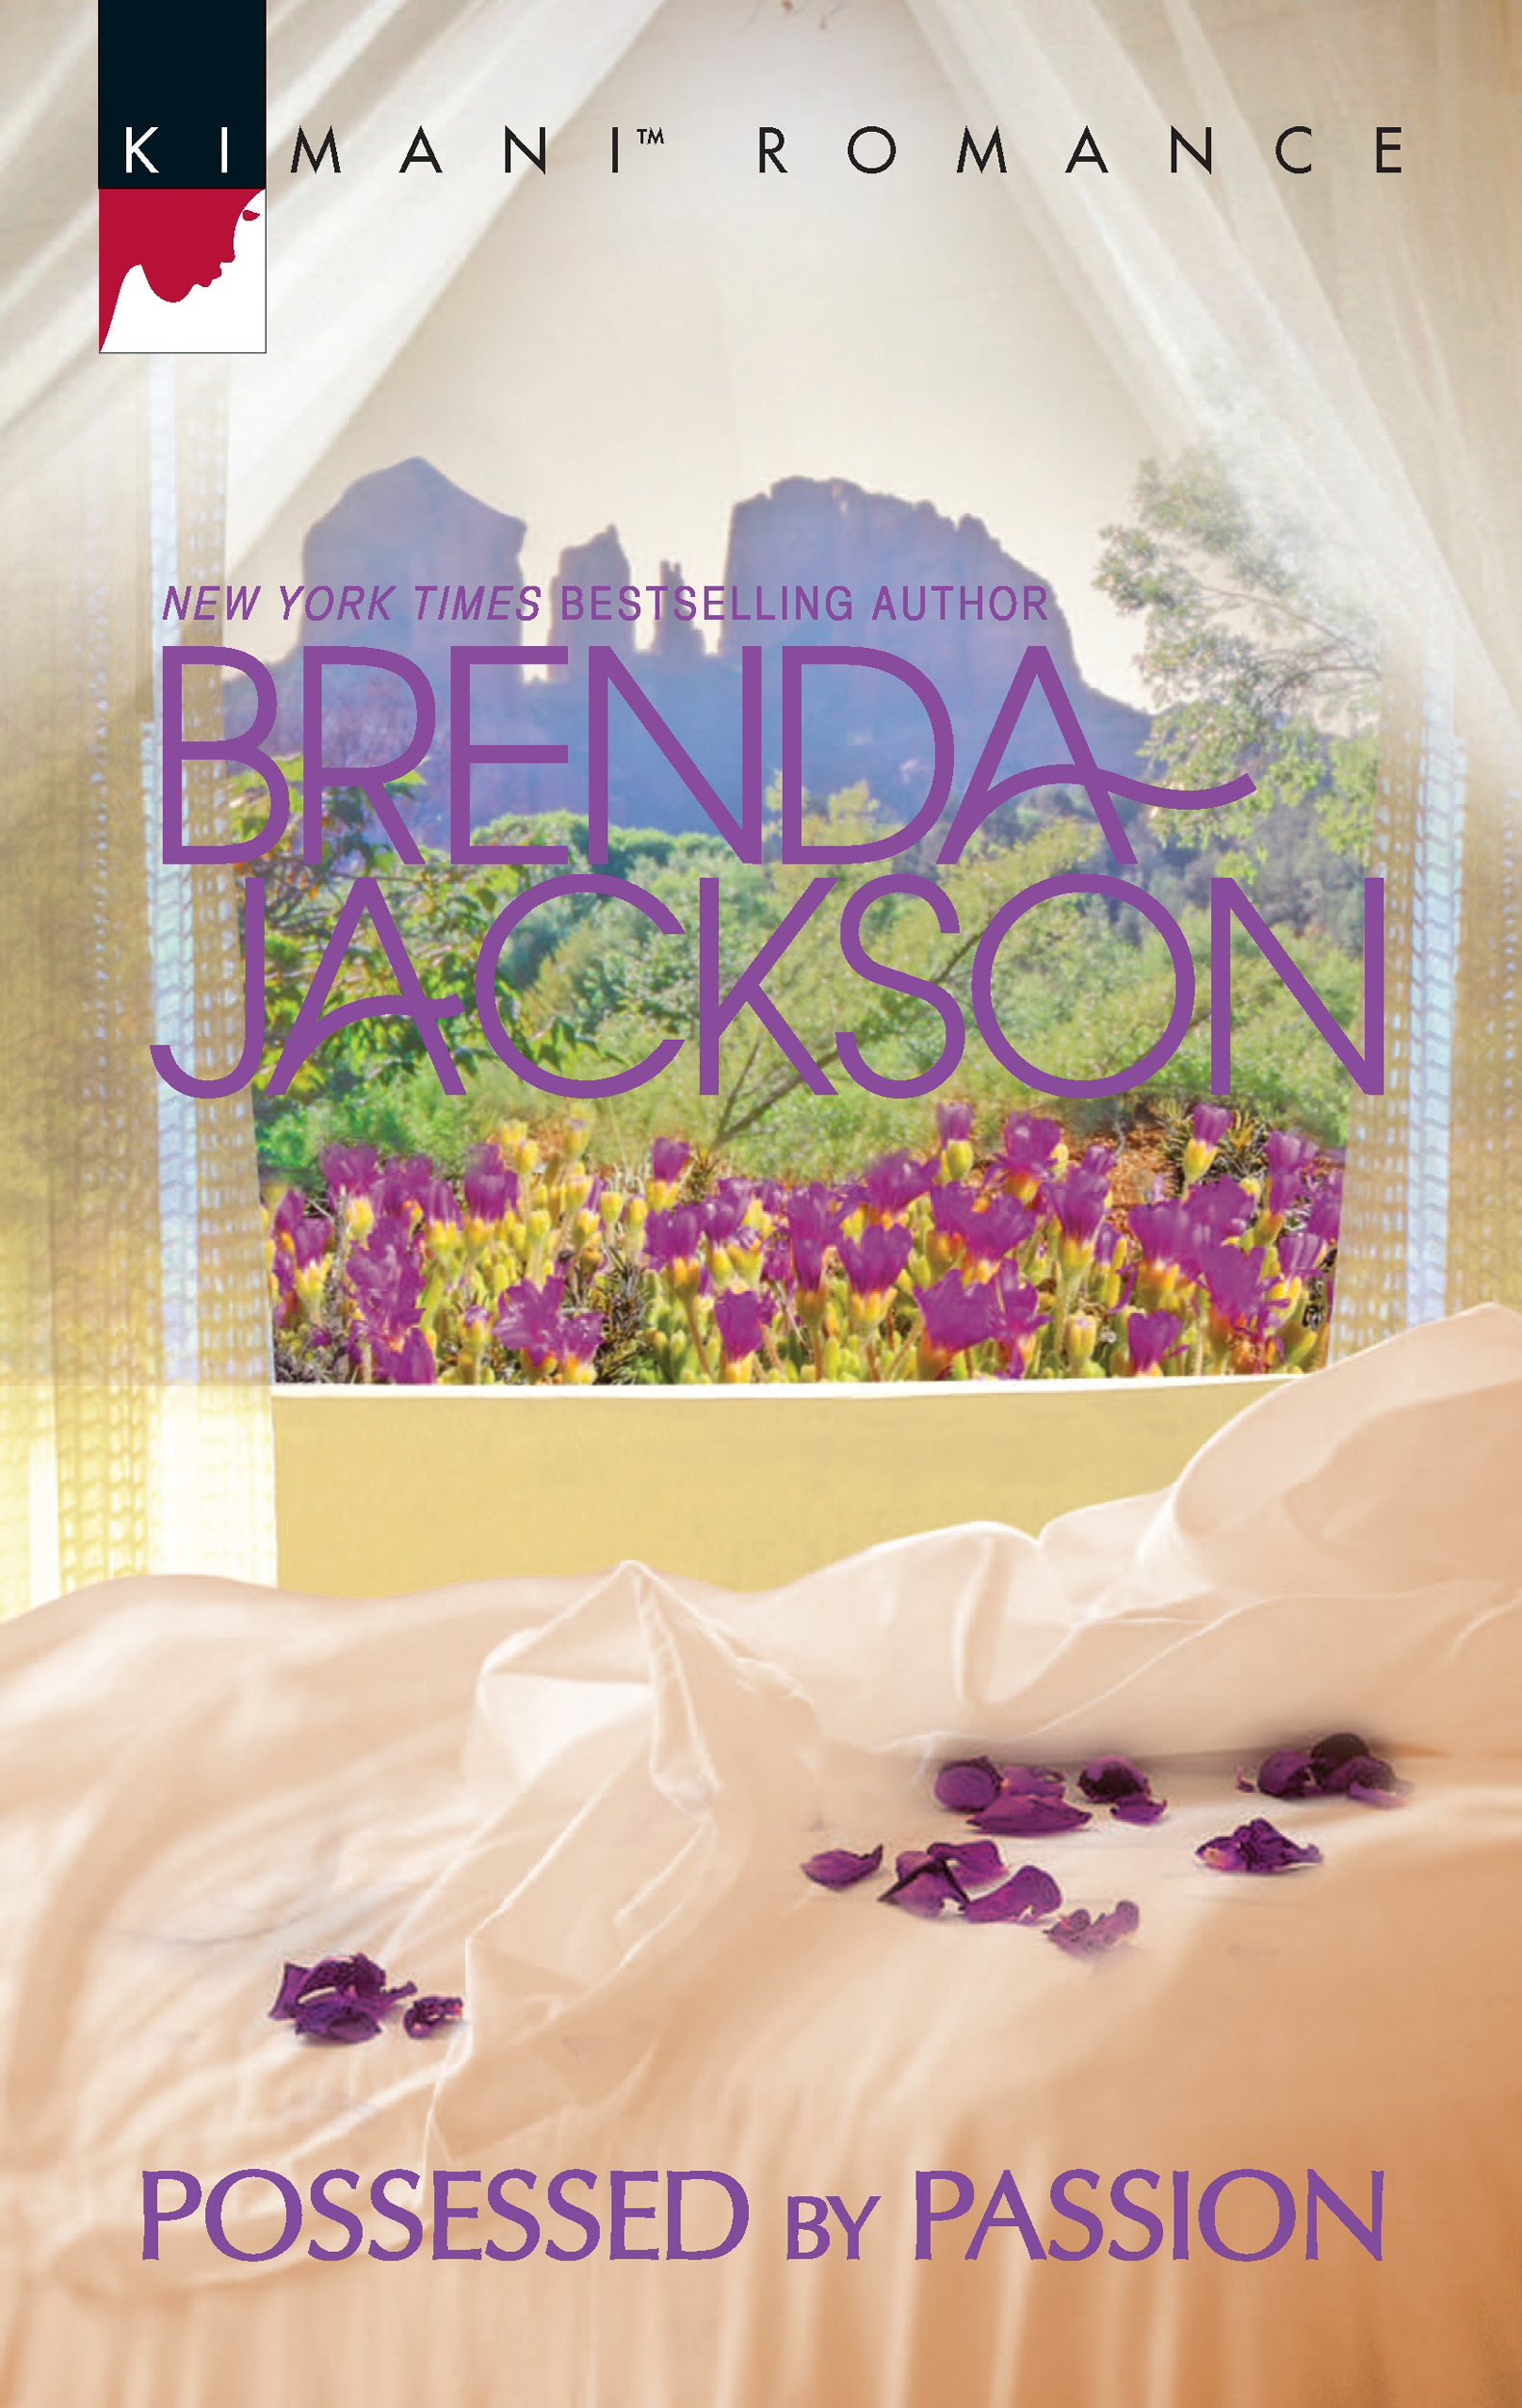 Possessed by Passion (2015) by Brenda Jackson